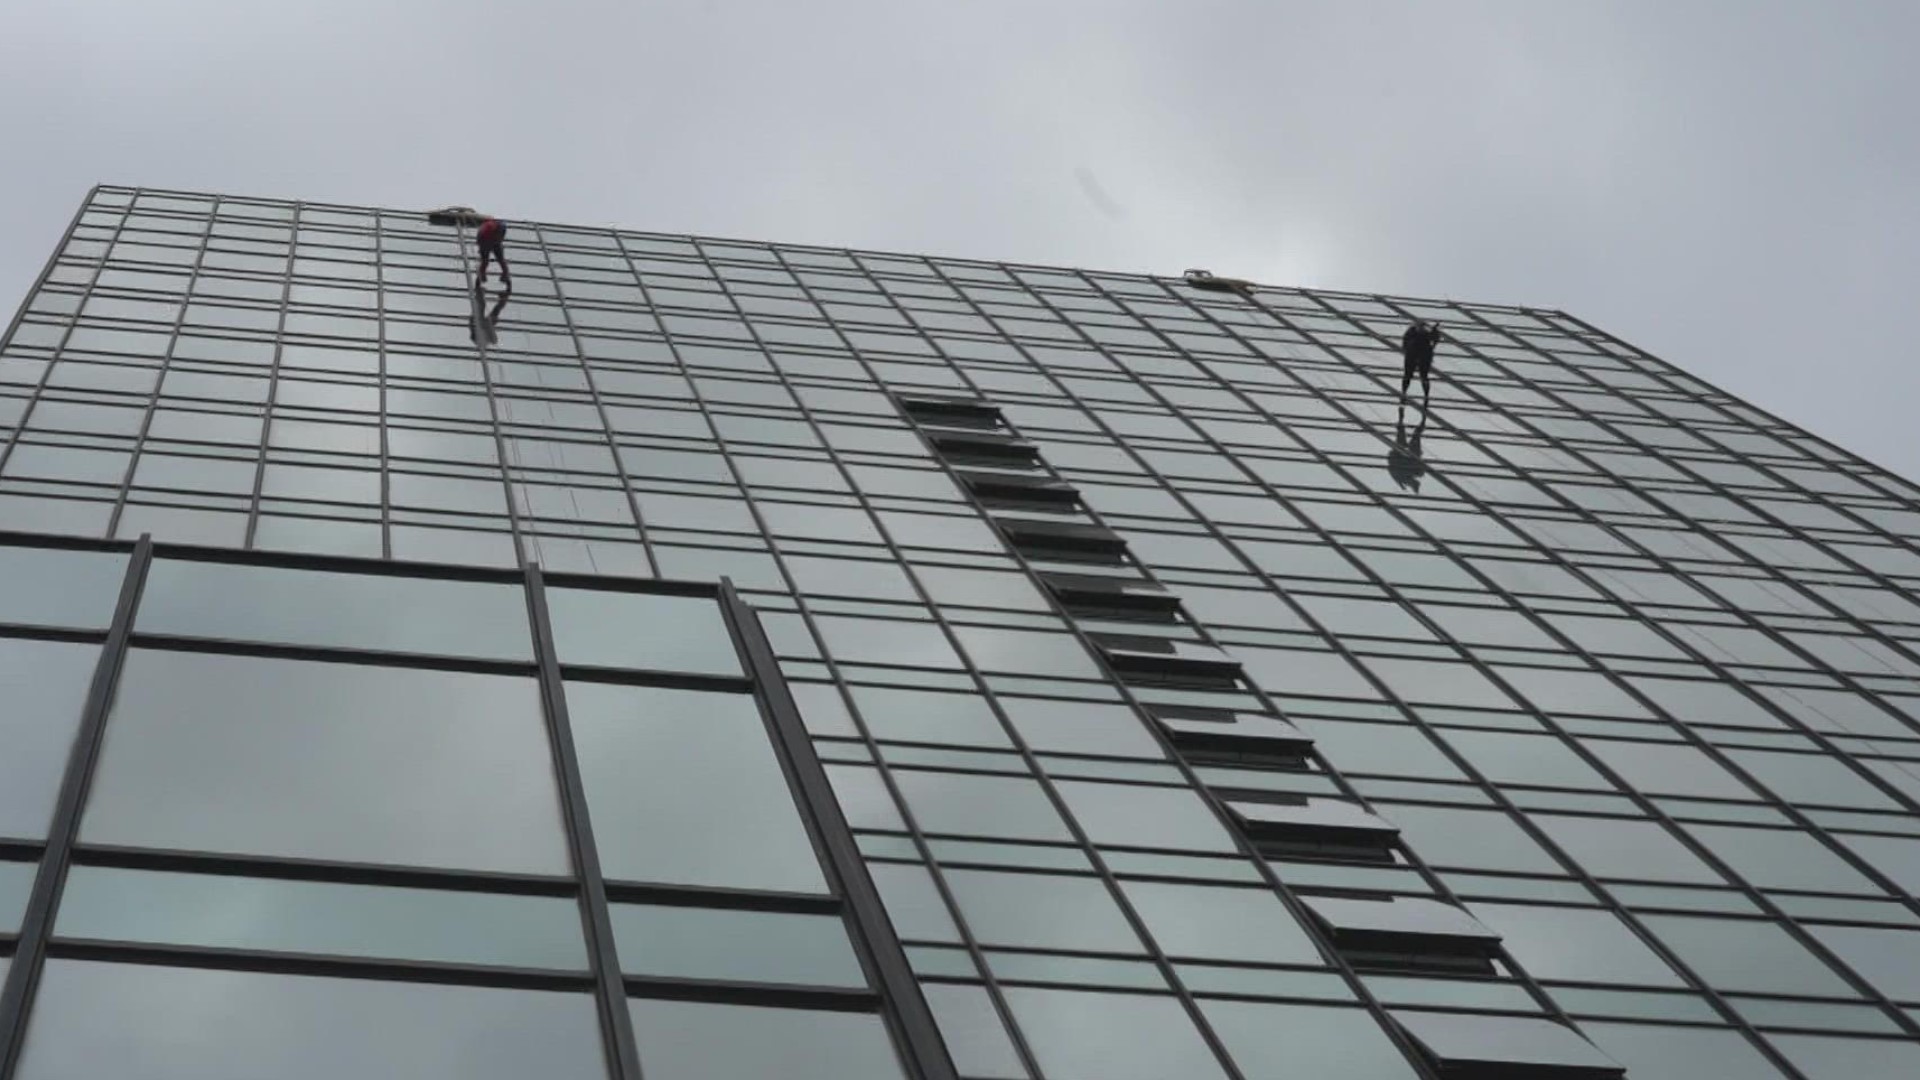 Those weren’t window washers you saw working their way down that tall building.